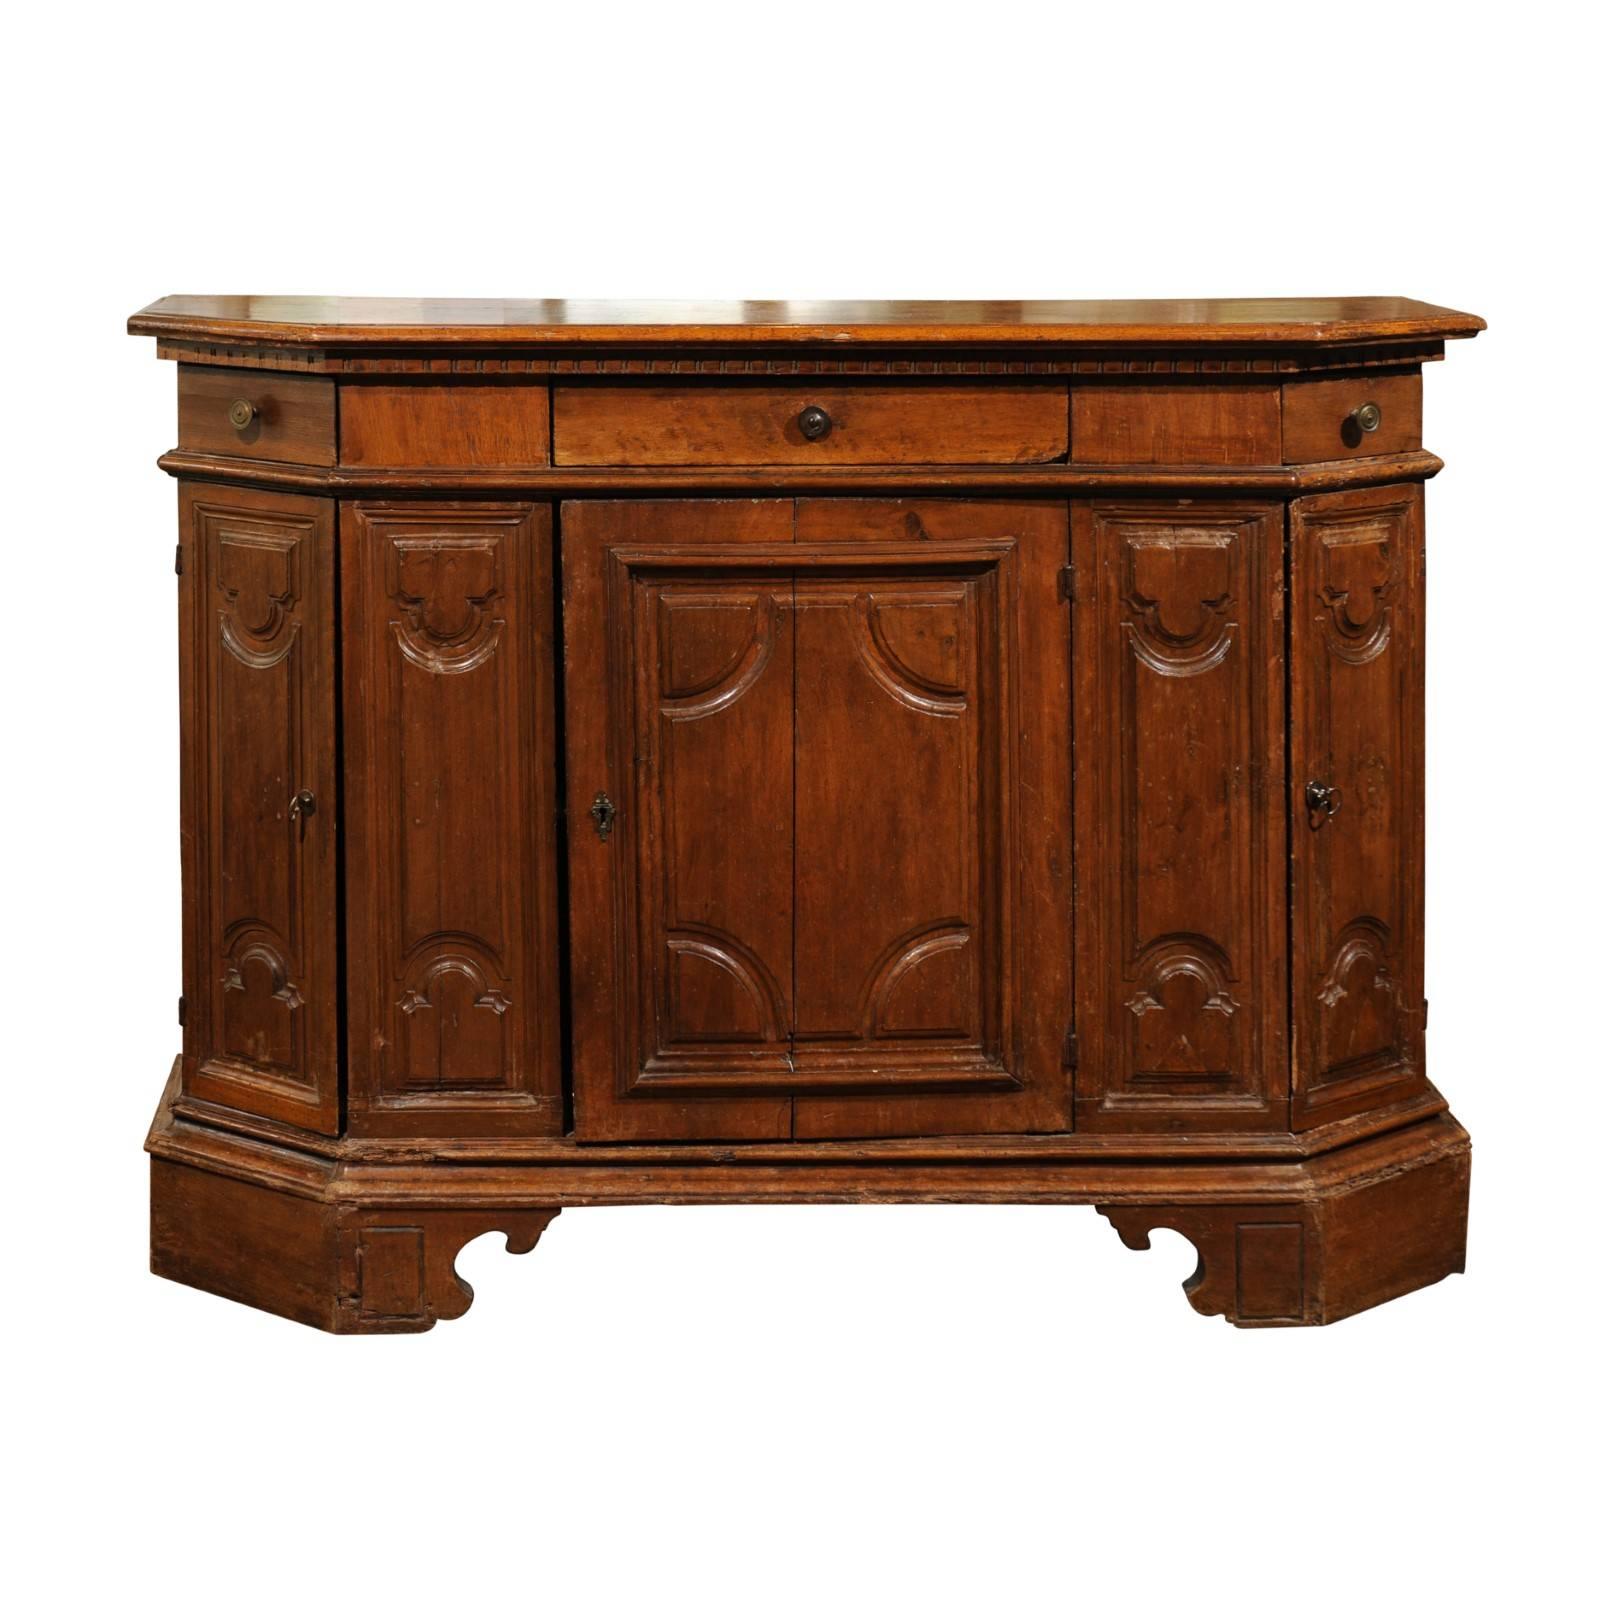 Italian Walnut Credenza from Siena with Canted Corners from the 19th Century